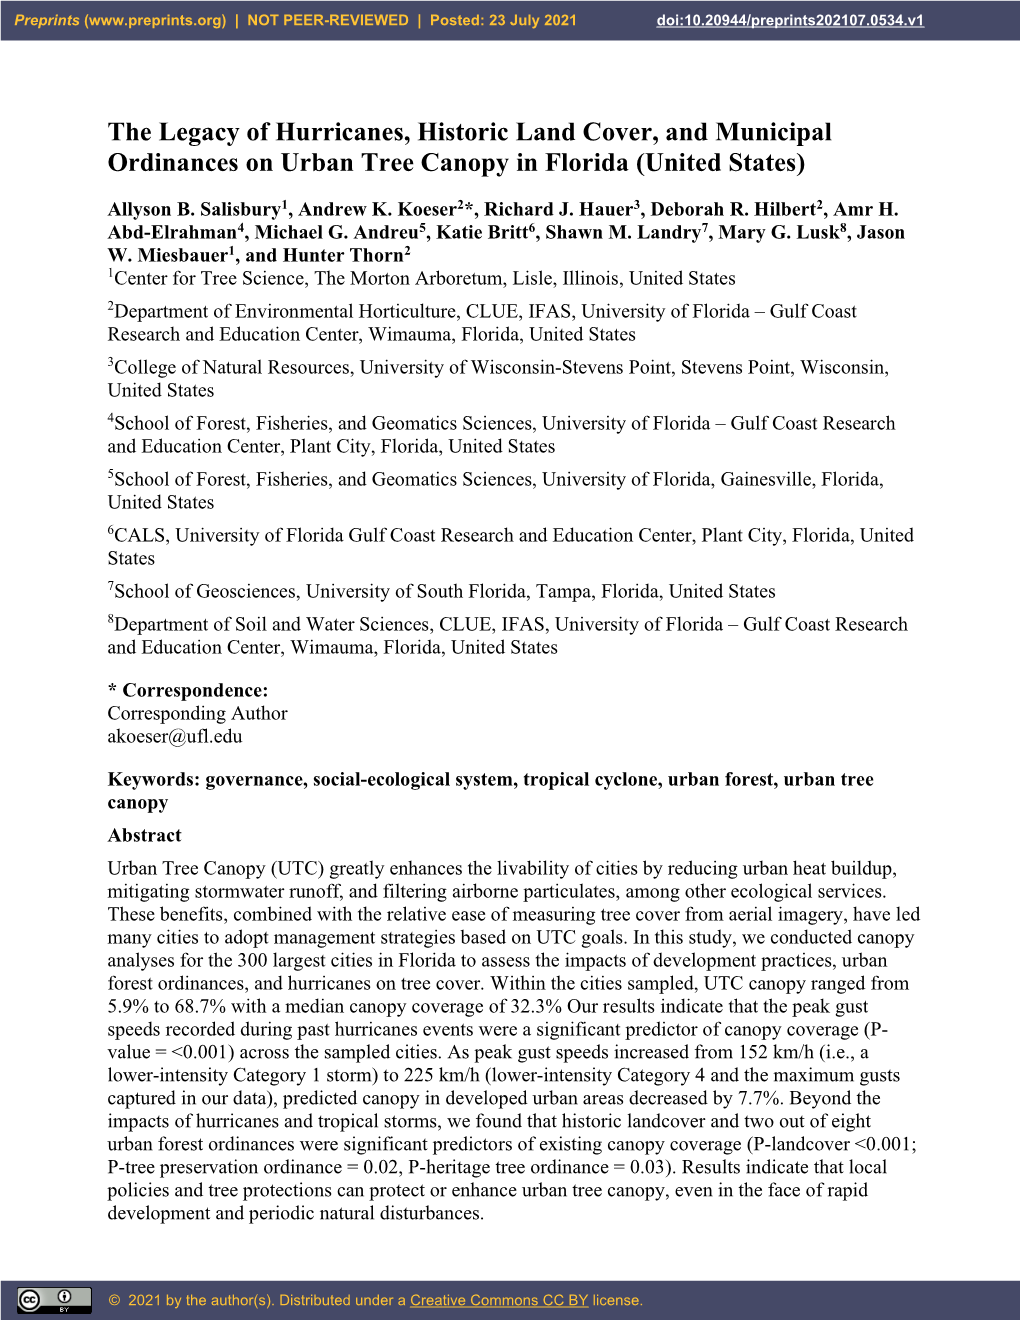 The Legacy of Hurricanes, Historic Land Cover, and Municipal Ordinances on Urban Tree Canopy in Florida (United States)